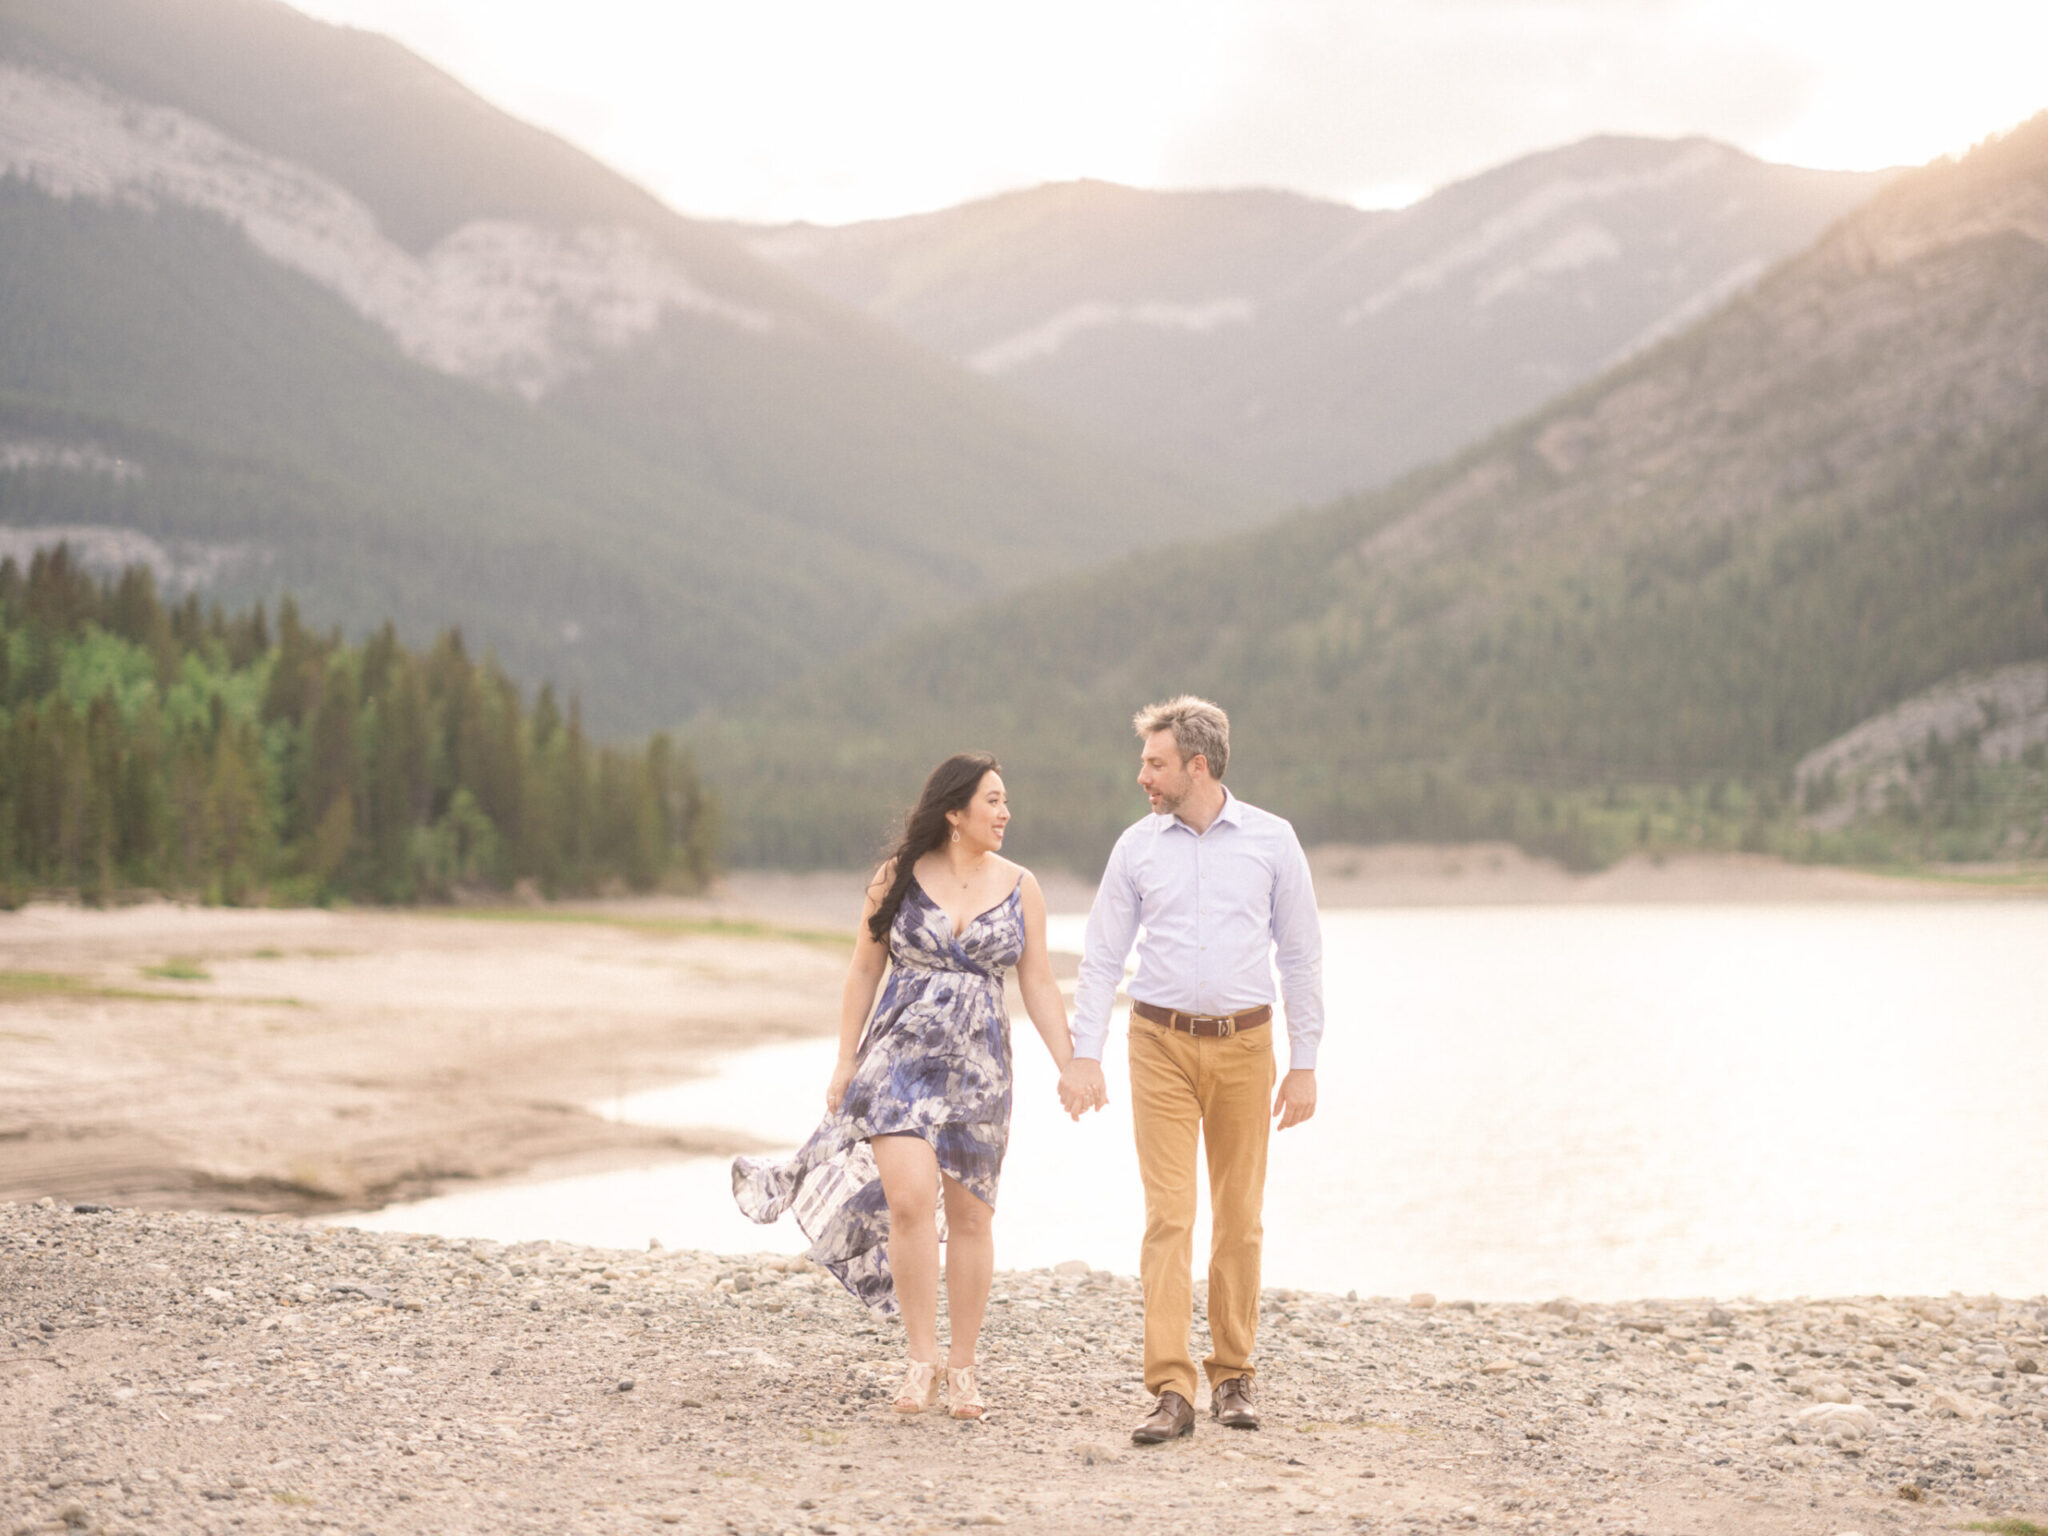 Dreamy Canmore Engagement Session, calgary wedding photographers, calgary engagement photographer, canmore banff wedding photographer, sunset engagement lake, couple walking on the beach, engagement at sunset, film photos of engagement